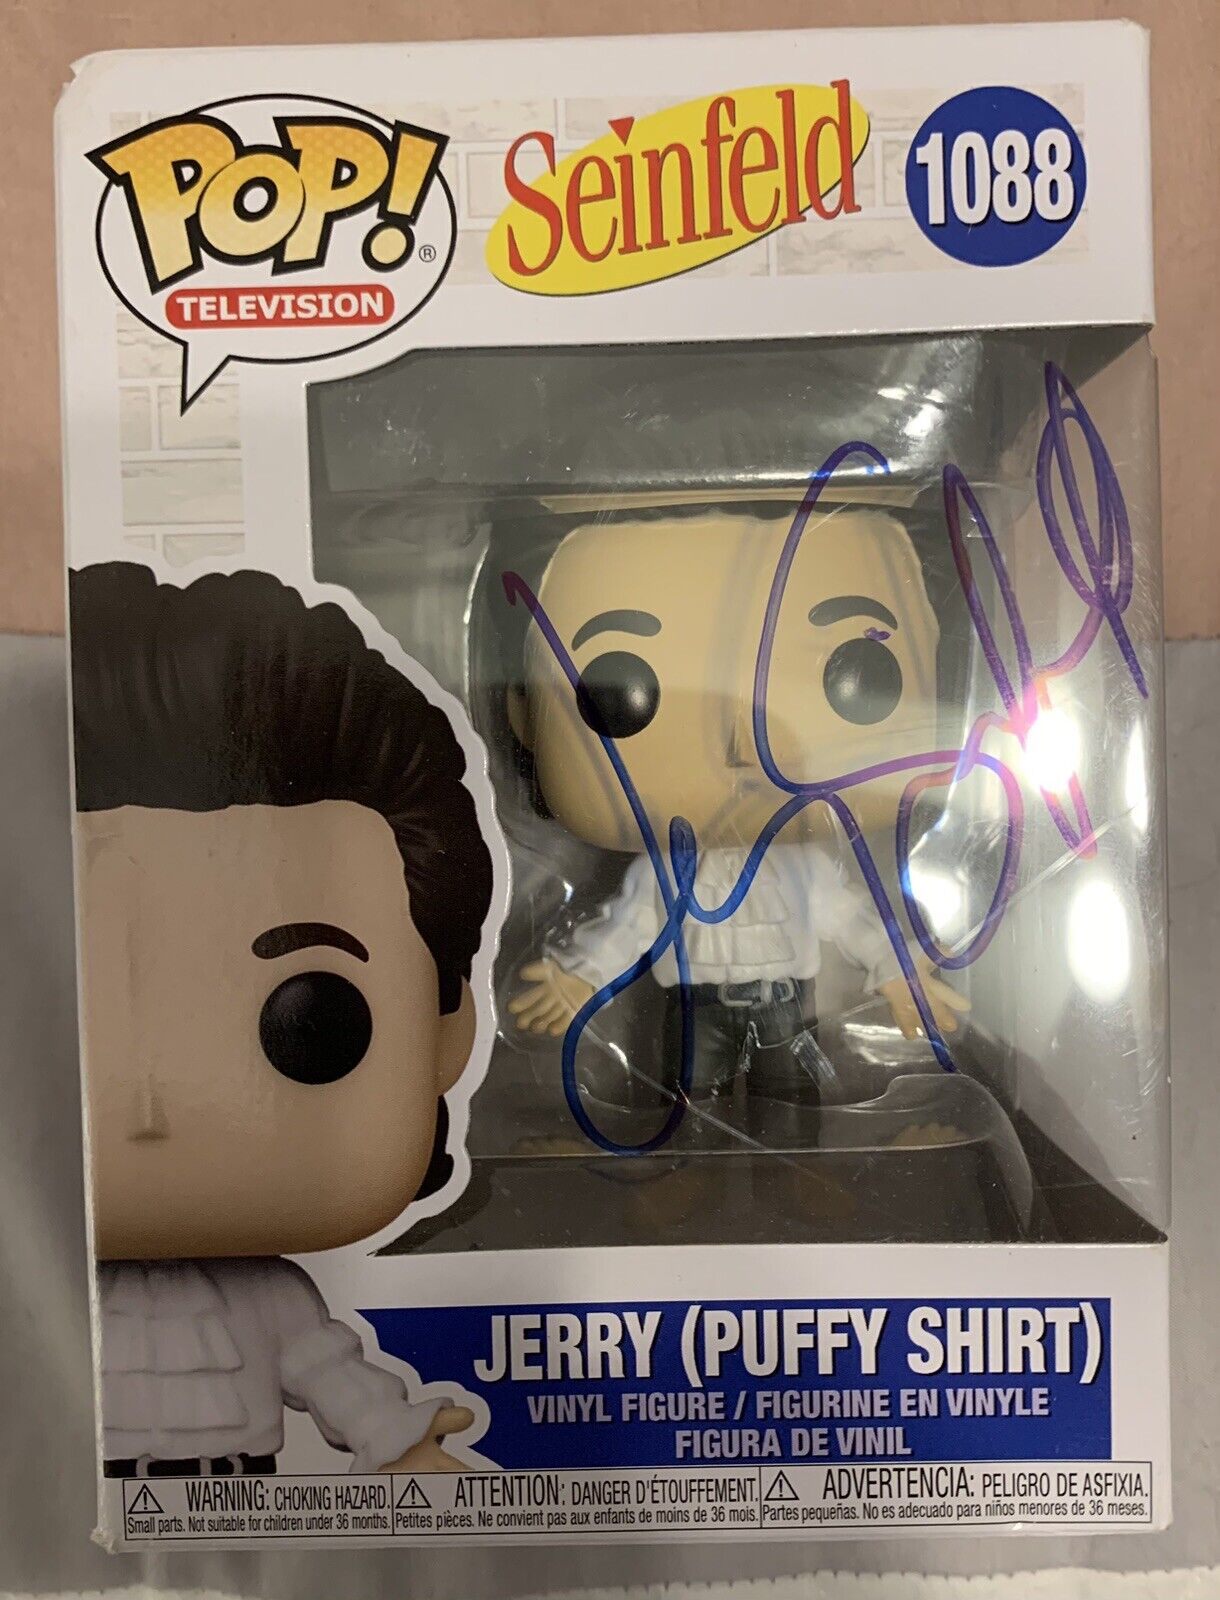 Funko Pop Vinyl: Jerry (Puffy Shirt) #1088 signed Zby Jerry Seinfeld